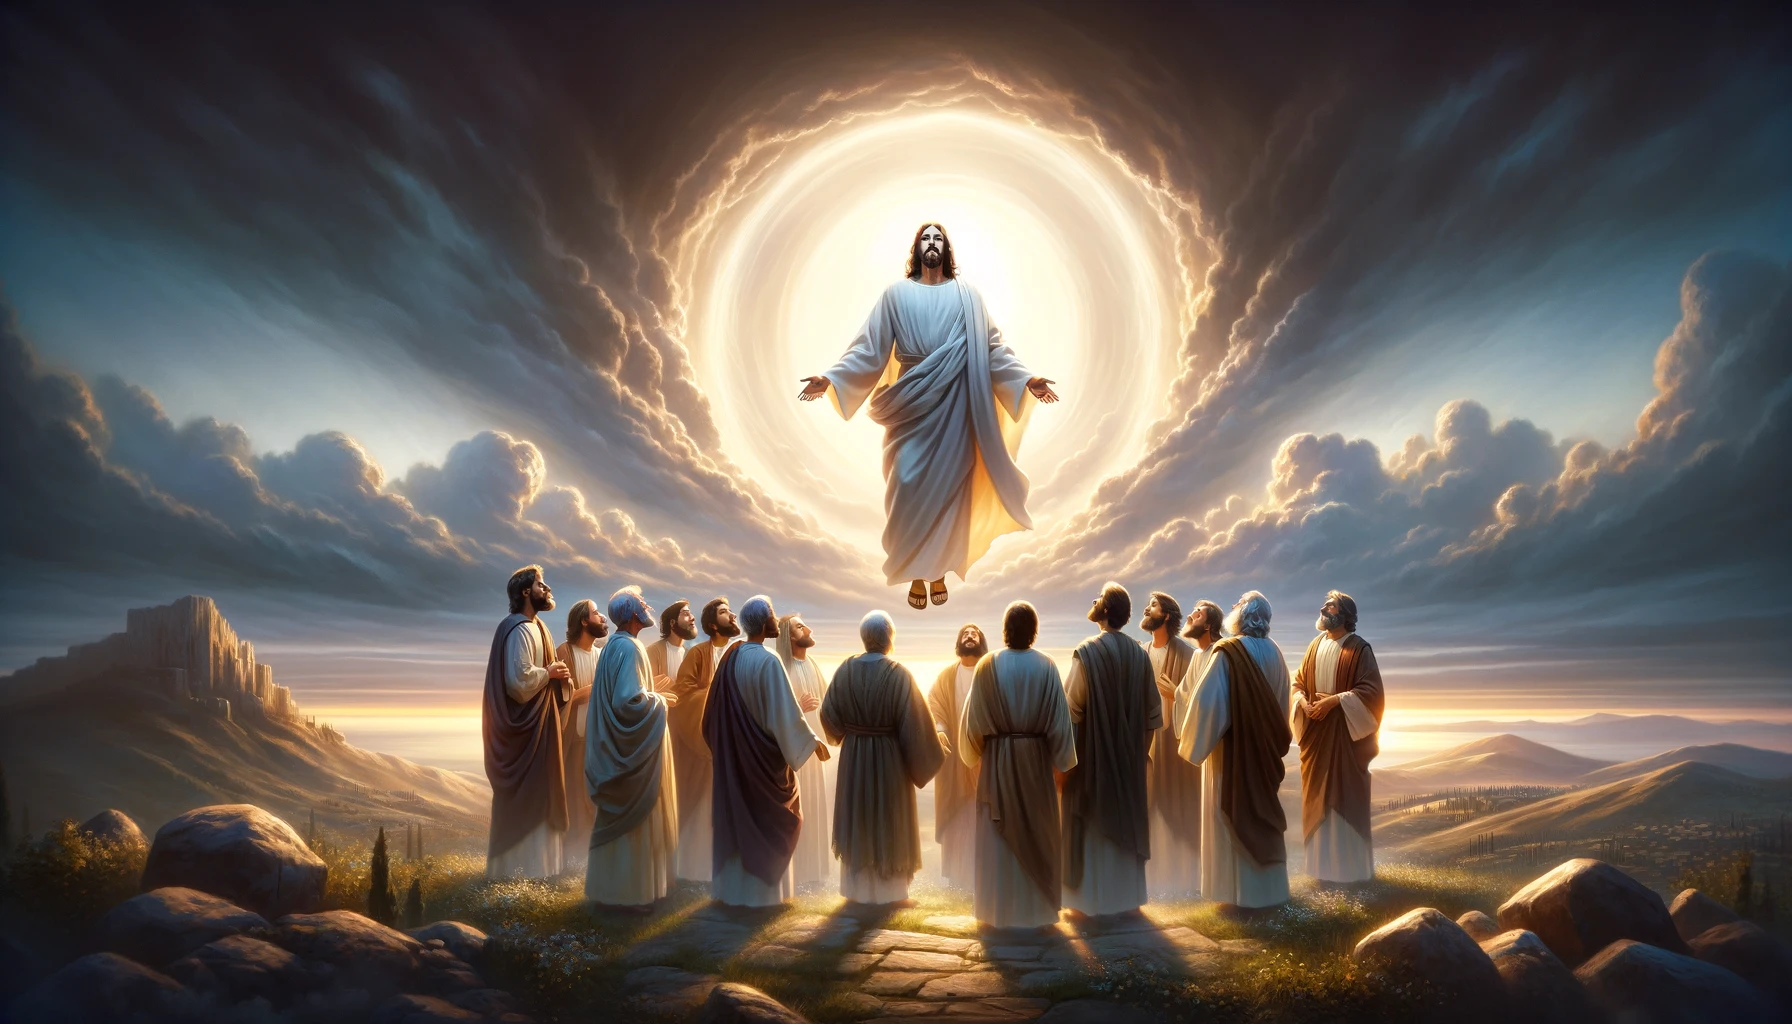 What Command Did Jesus Give The Apostles Immediately Before His Ascension